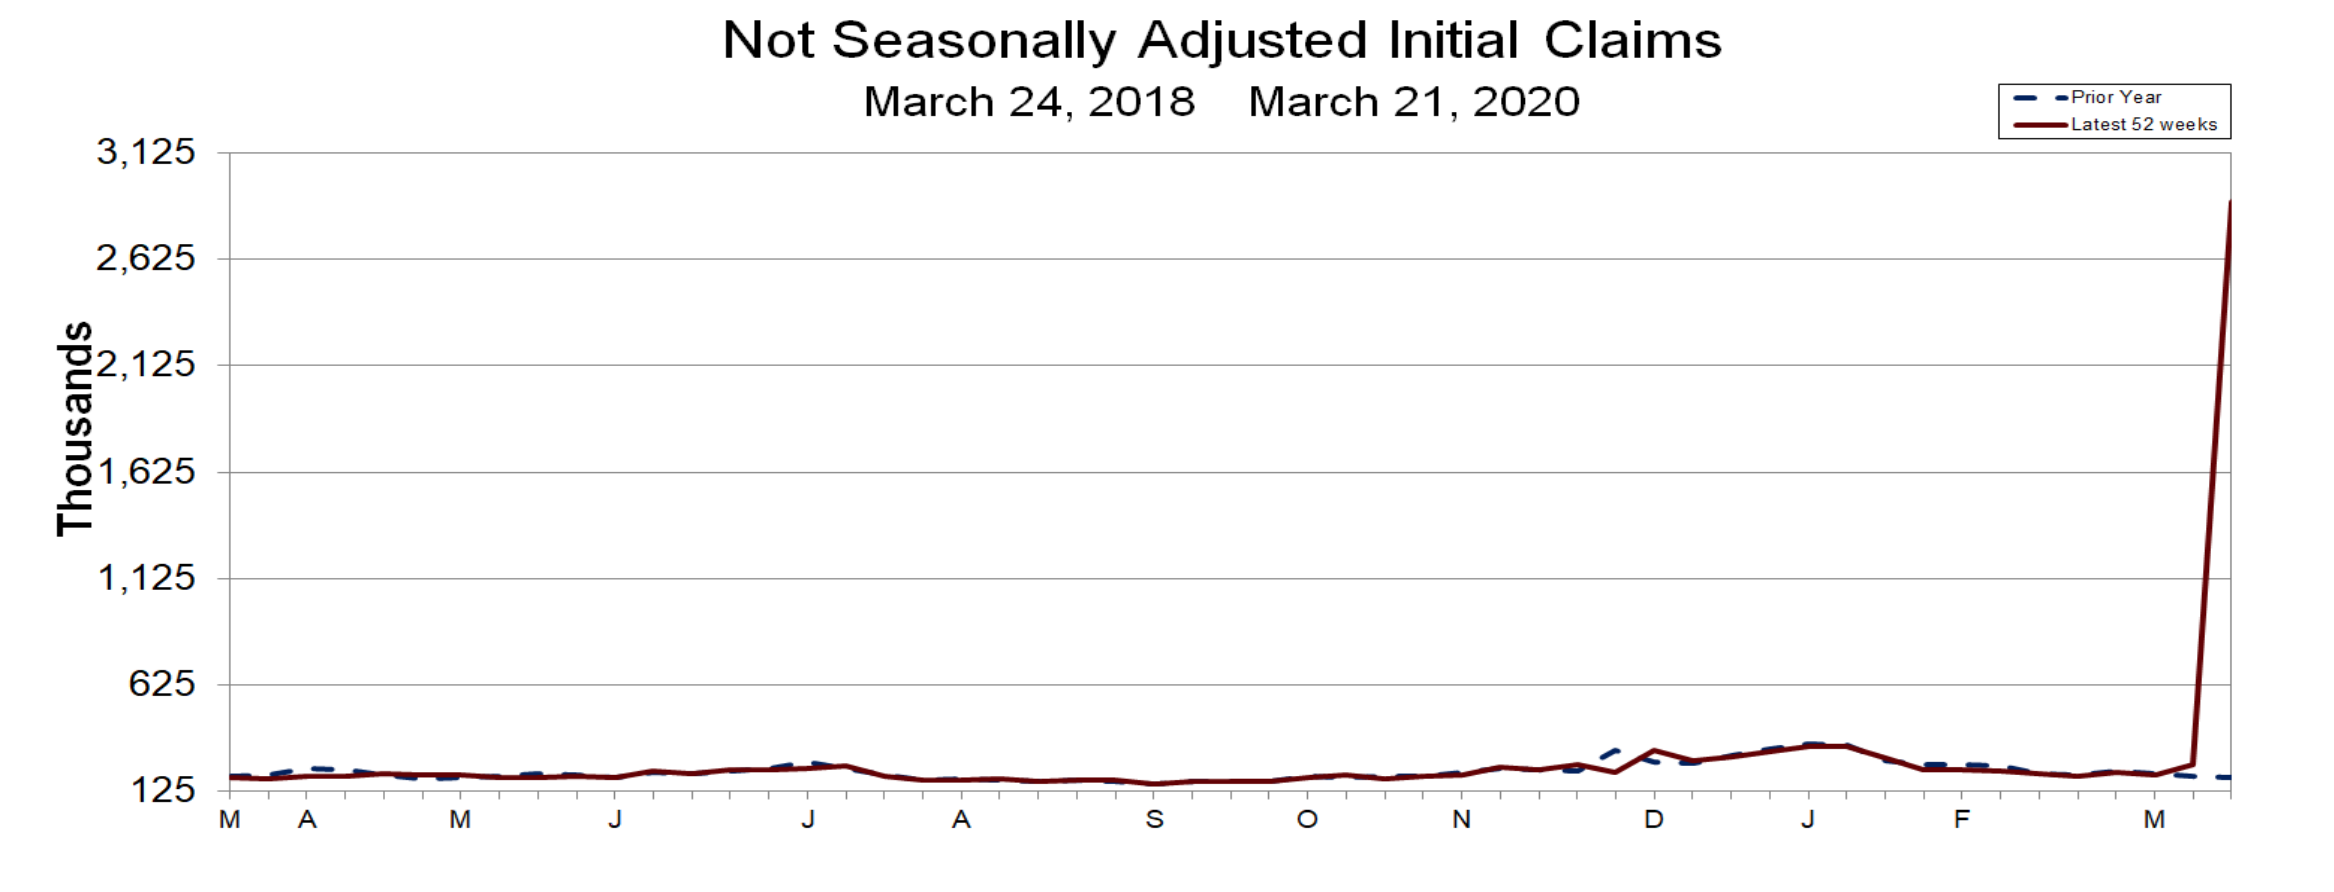 First-time unemployment claims through March 21, 2020